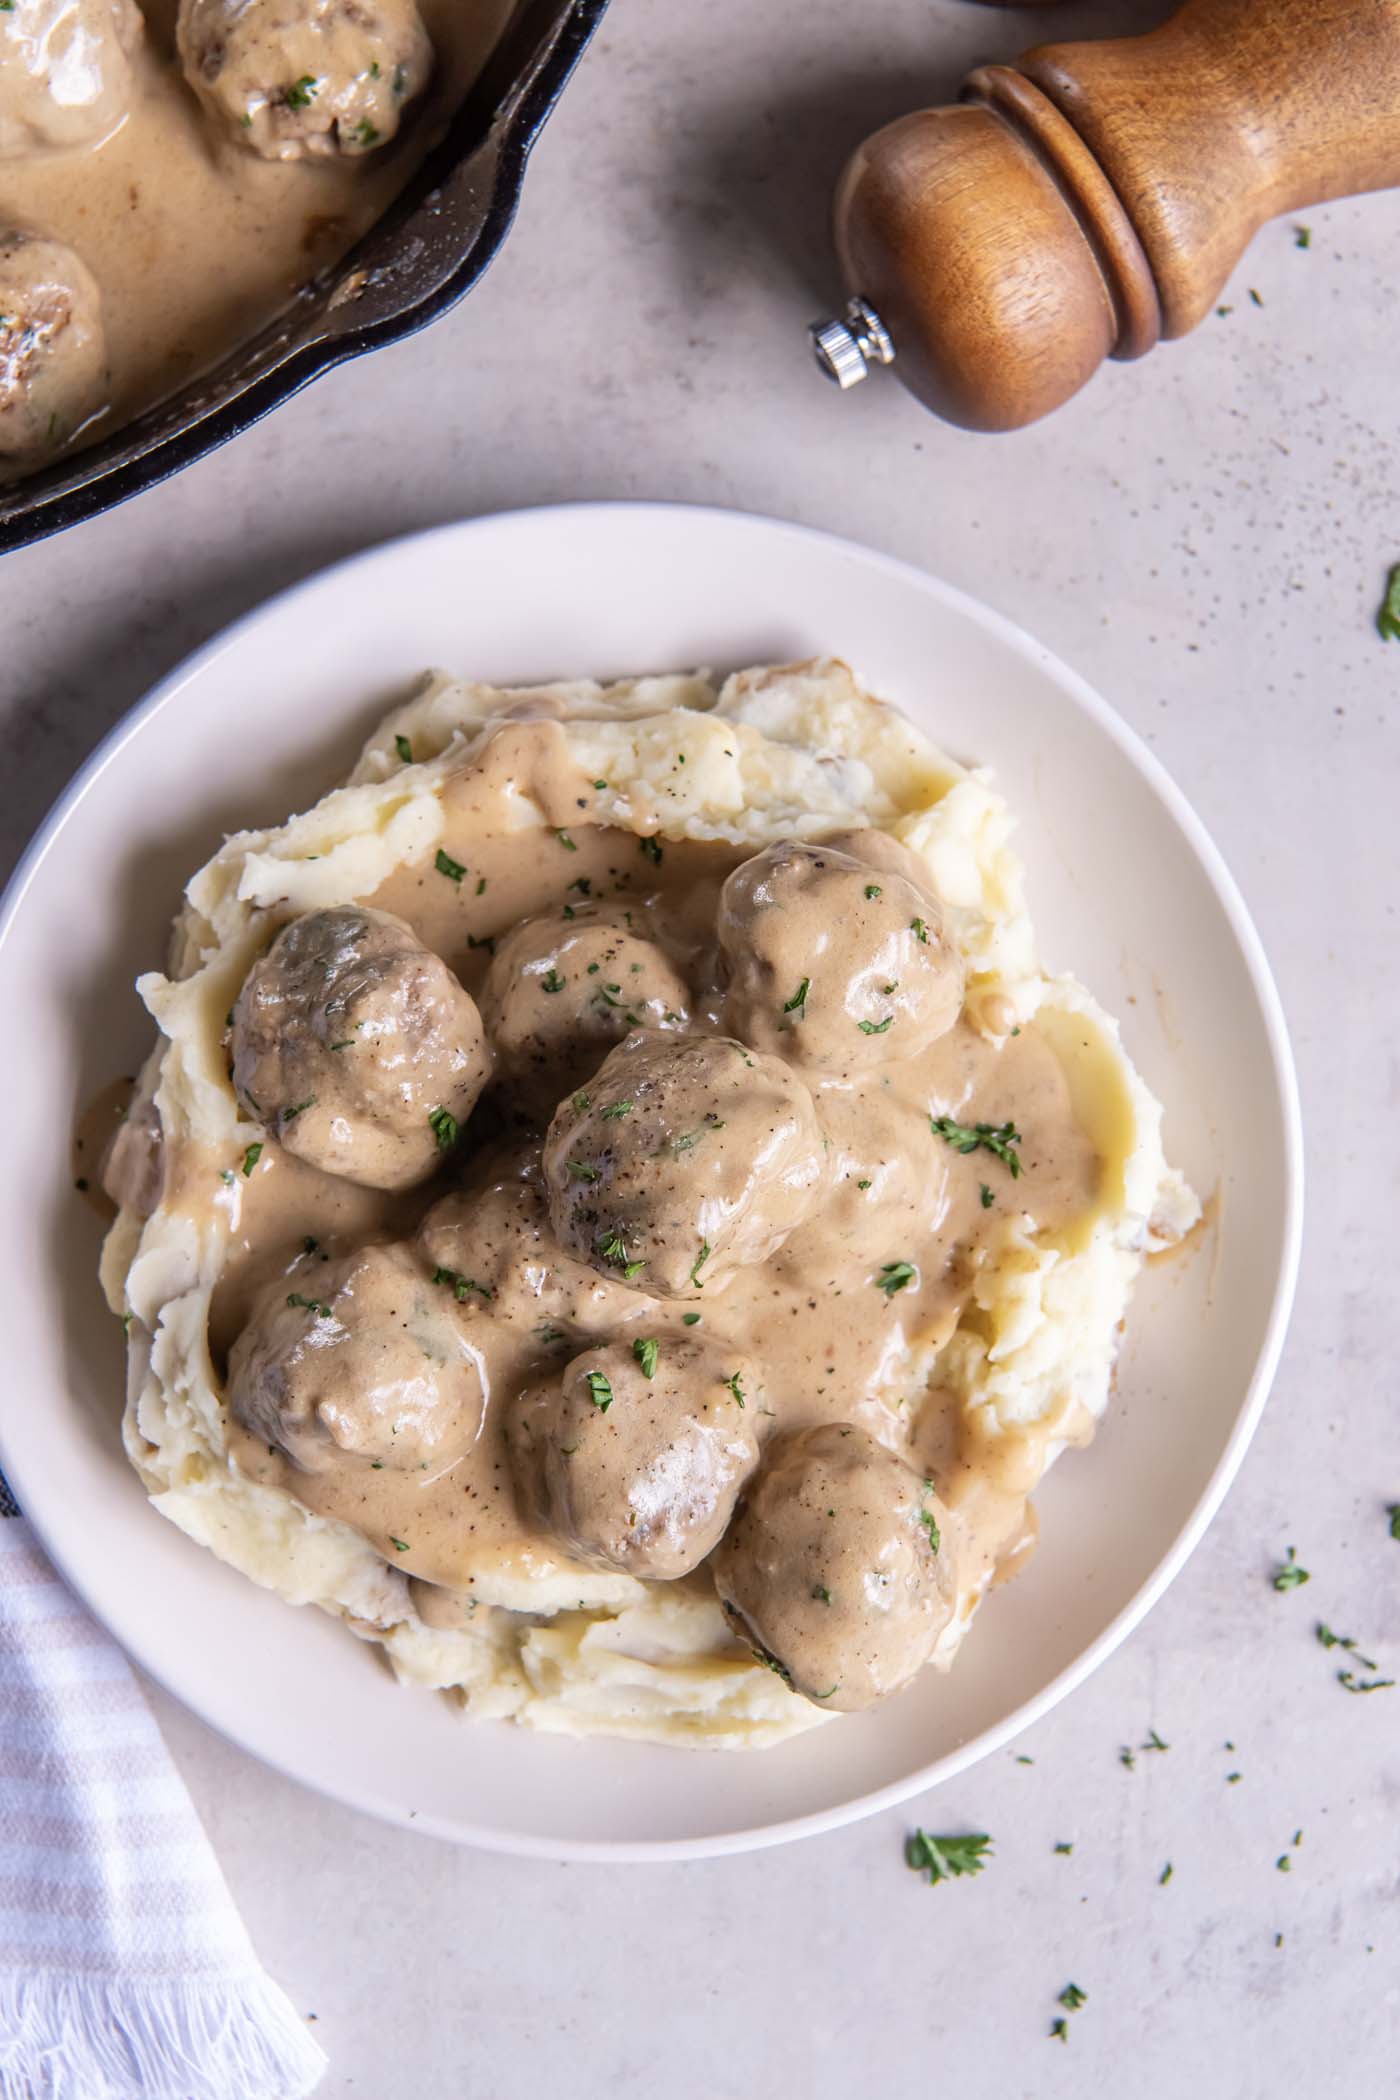 Meatballs and gravy served over mashed potatoes.